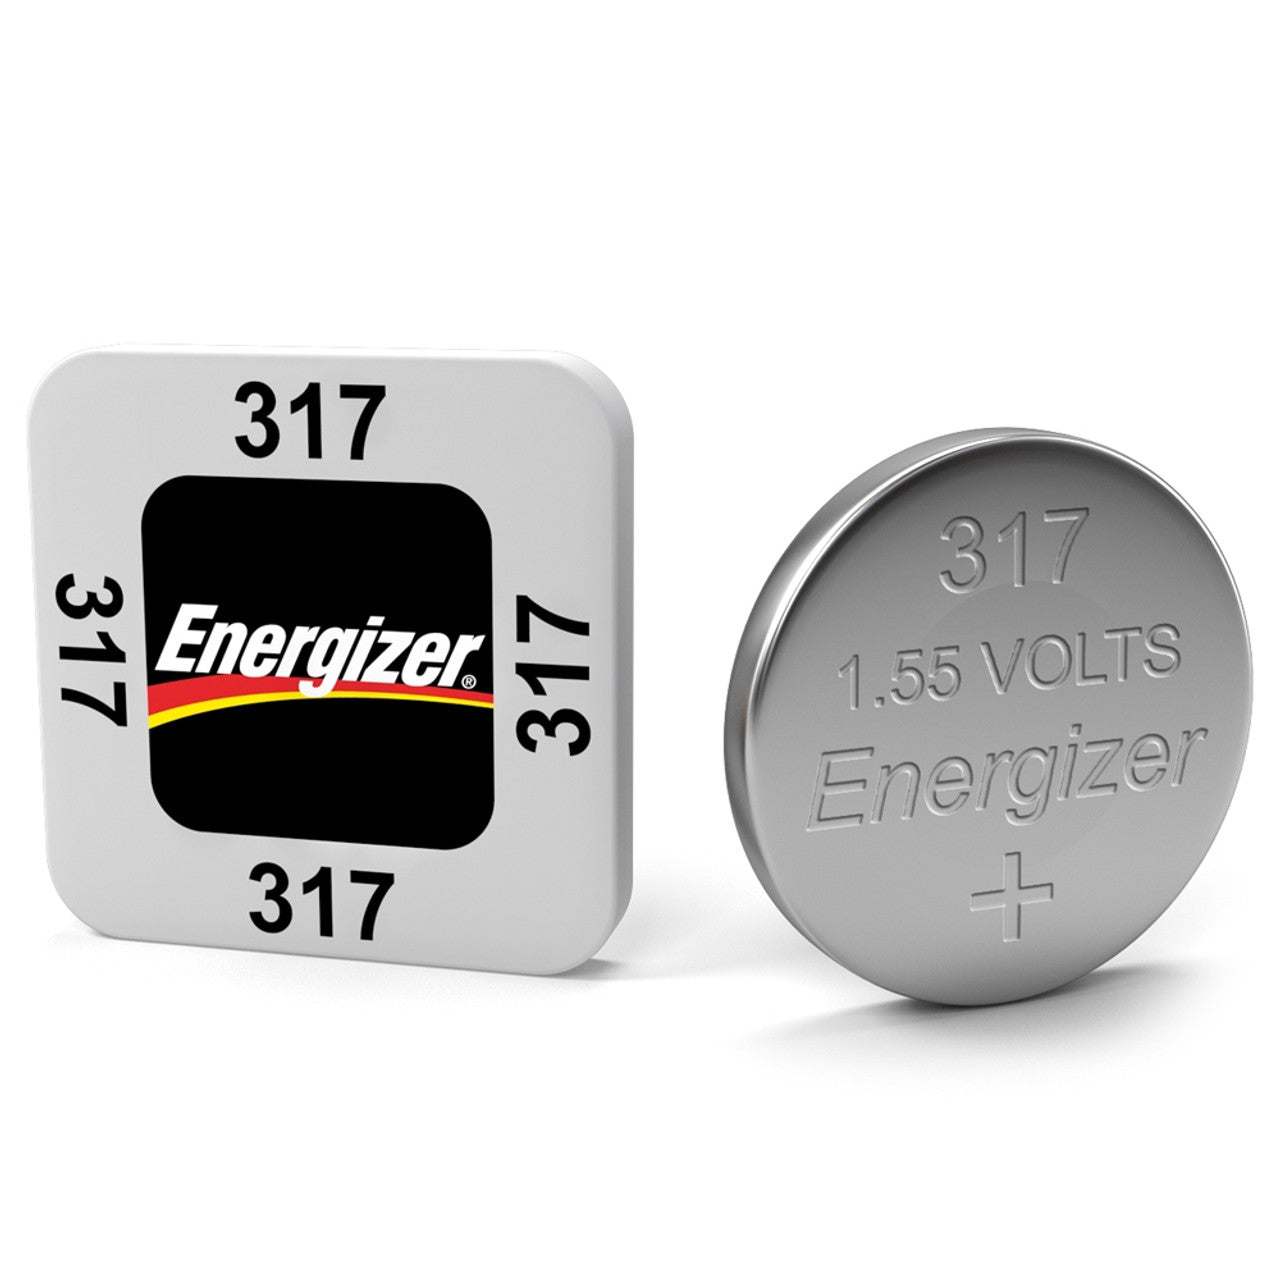 Energizer 317 Silberoxid-Knopfzelle, 10er-Pack